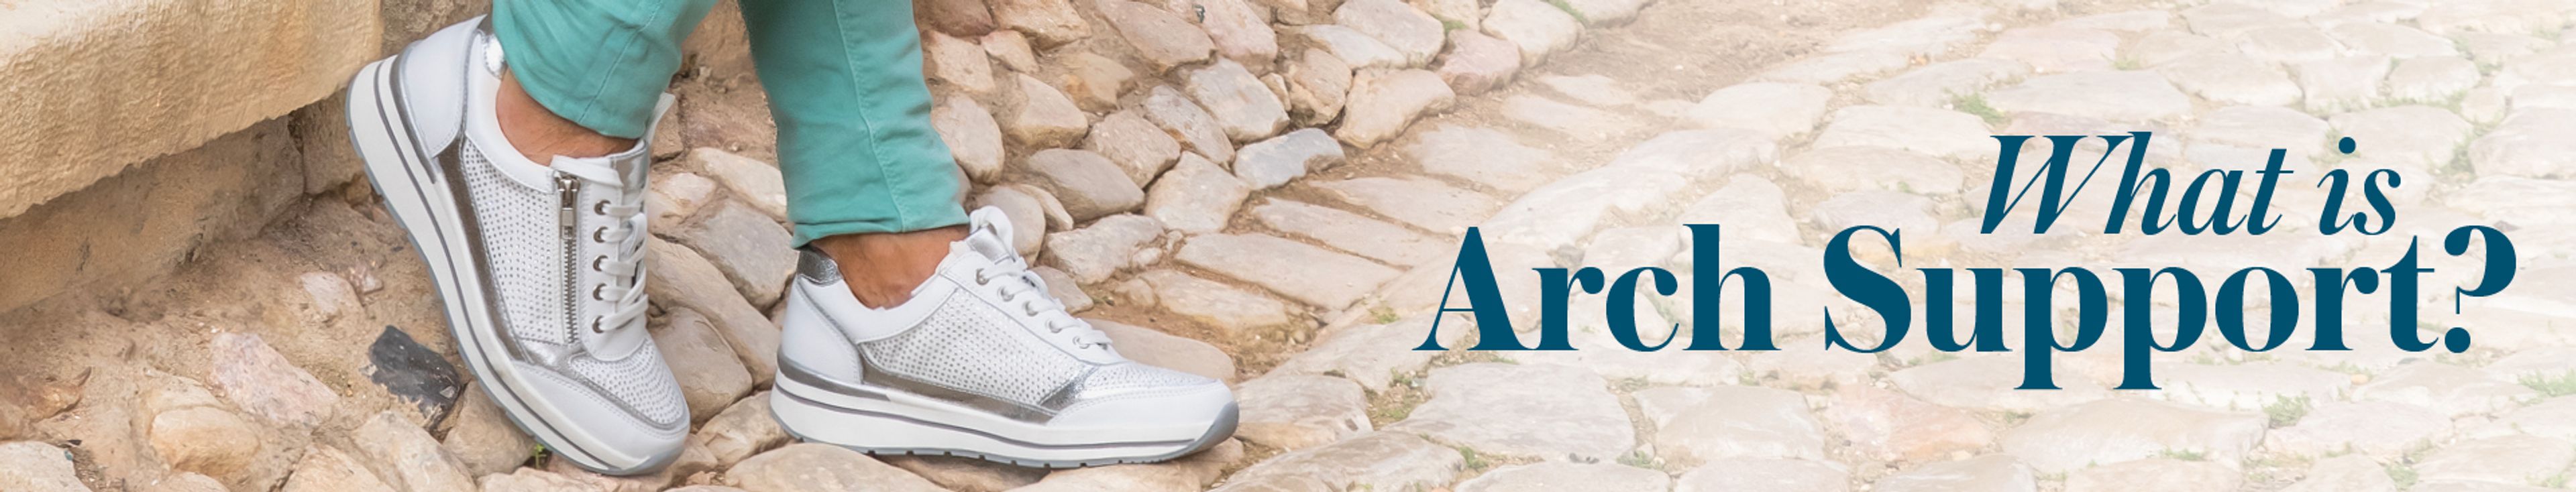 What is Arch Support Footwear?